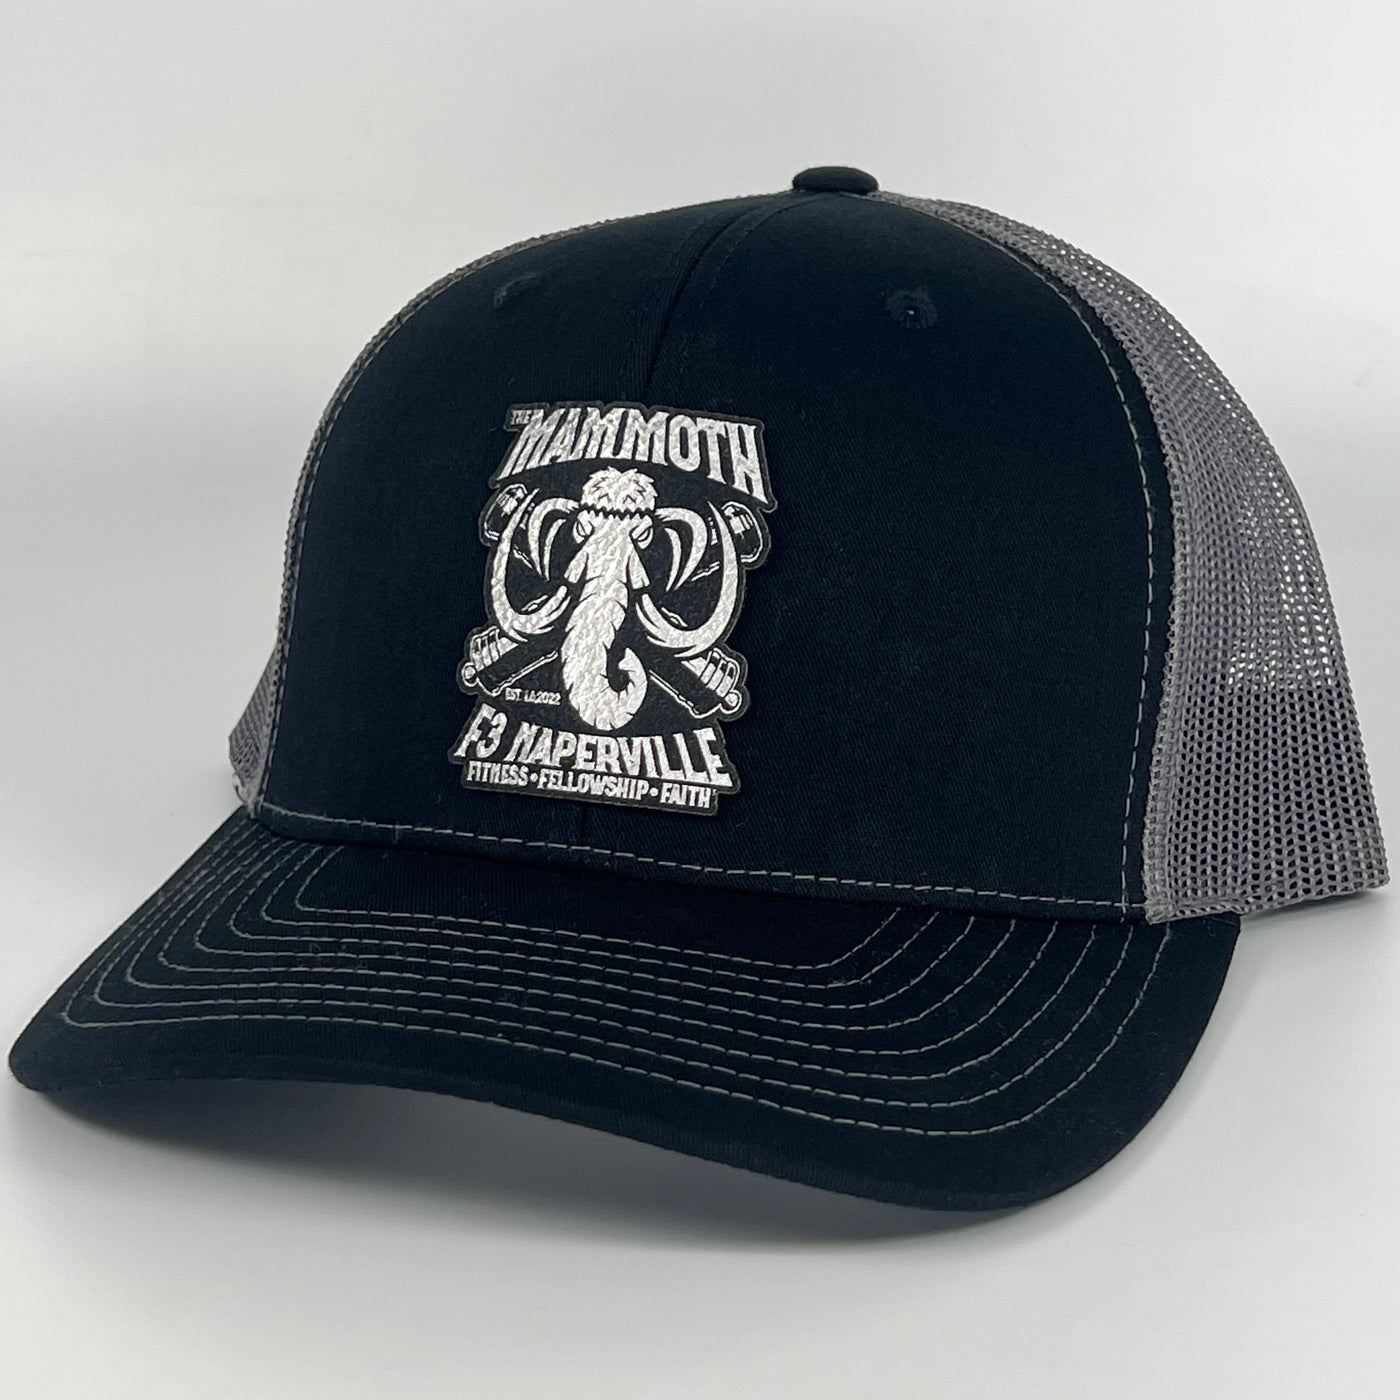 F3 Naperville The Mammoth Leatherette Patch Hat Pre-Order October 2022